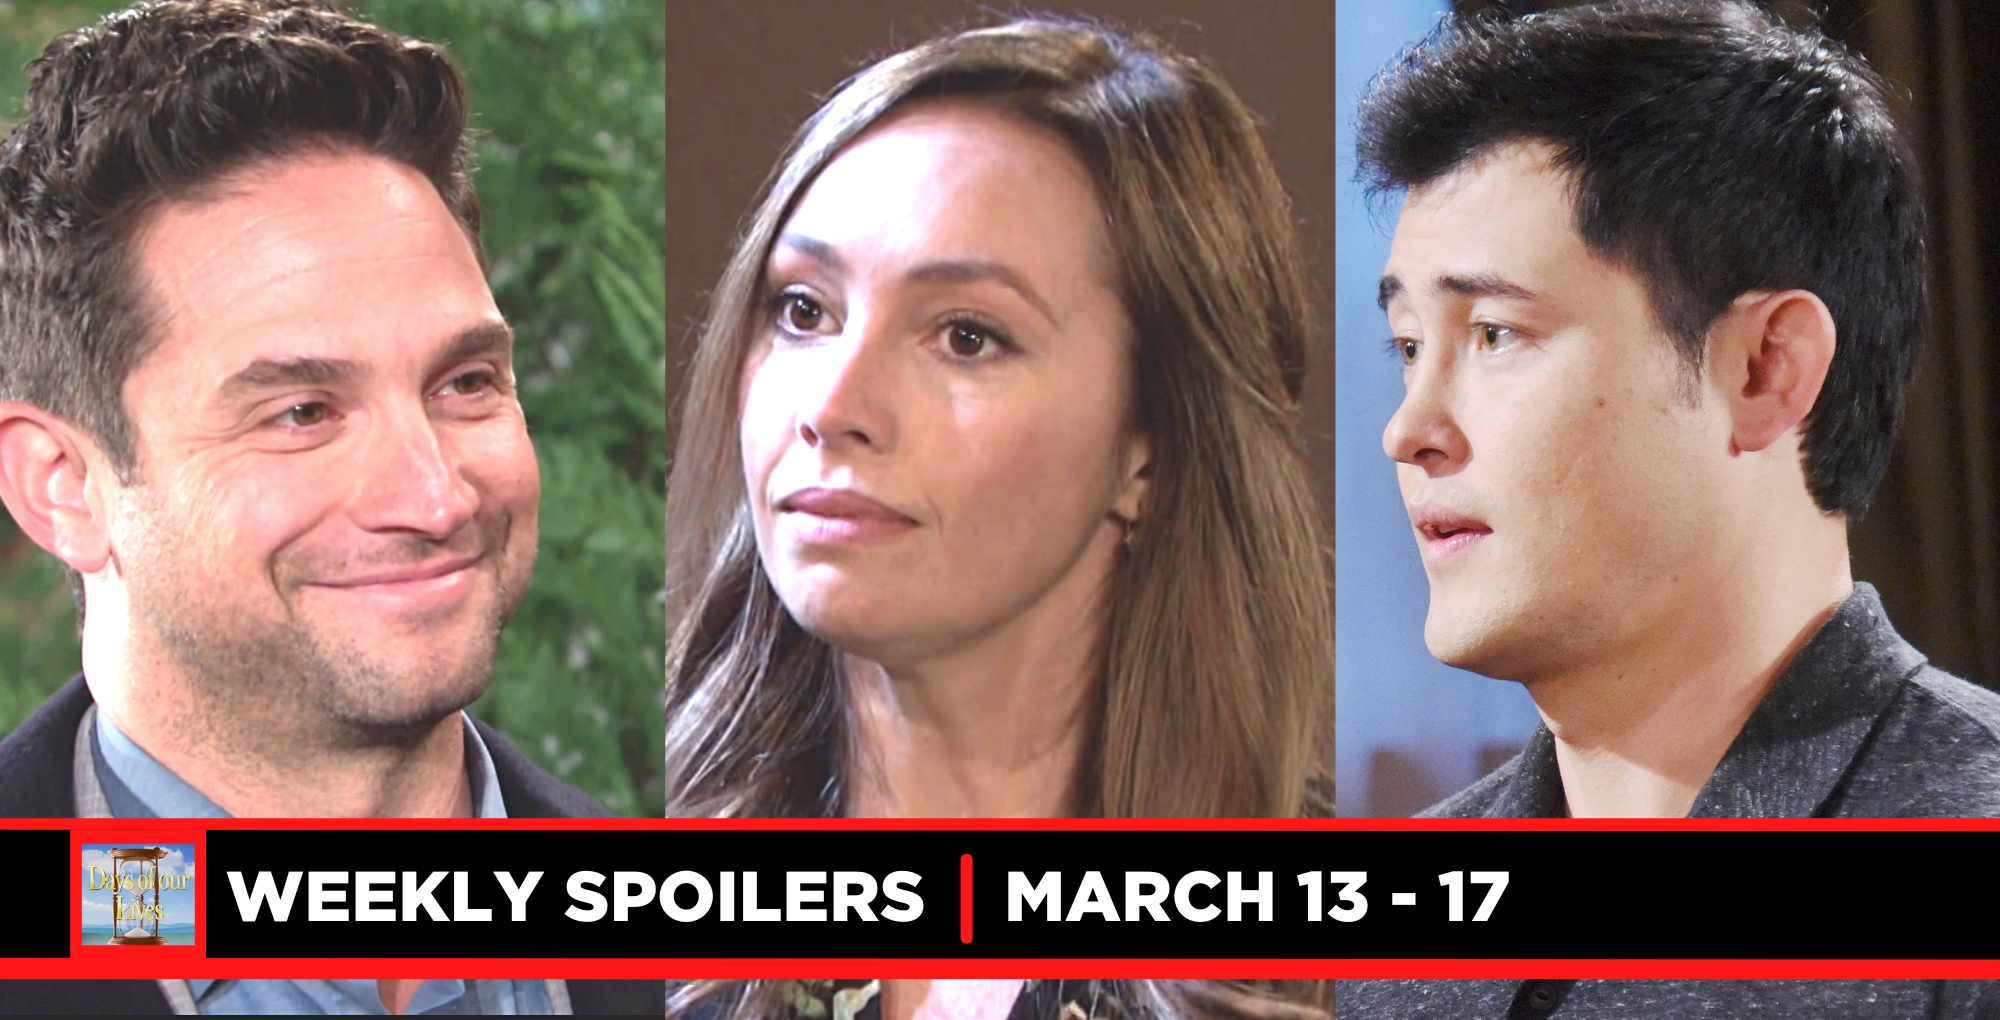 days of our lives spoilers for march 13 – march 17, 2023, three images, stefan, gwen, and paul